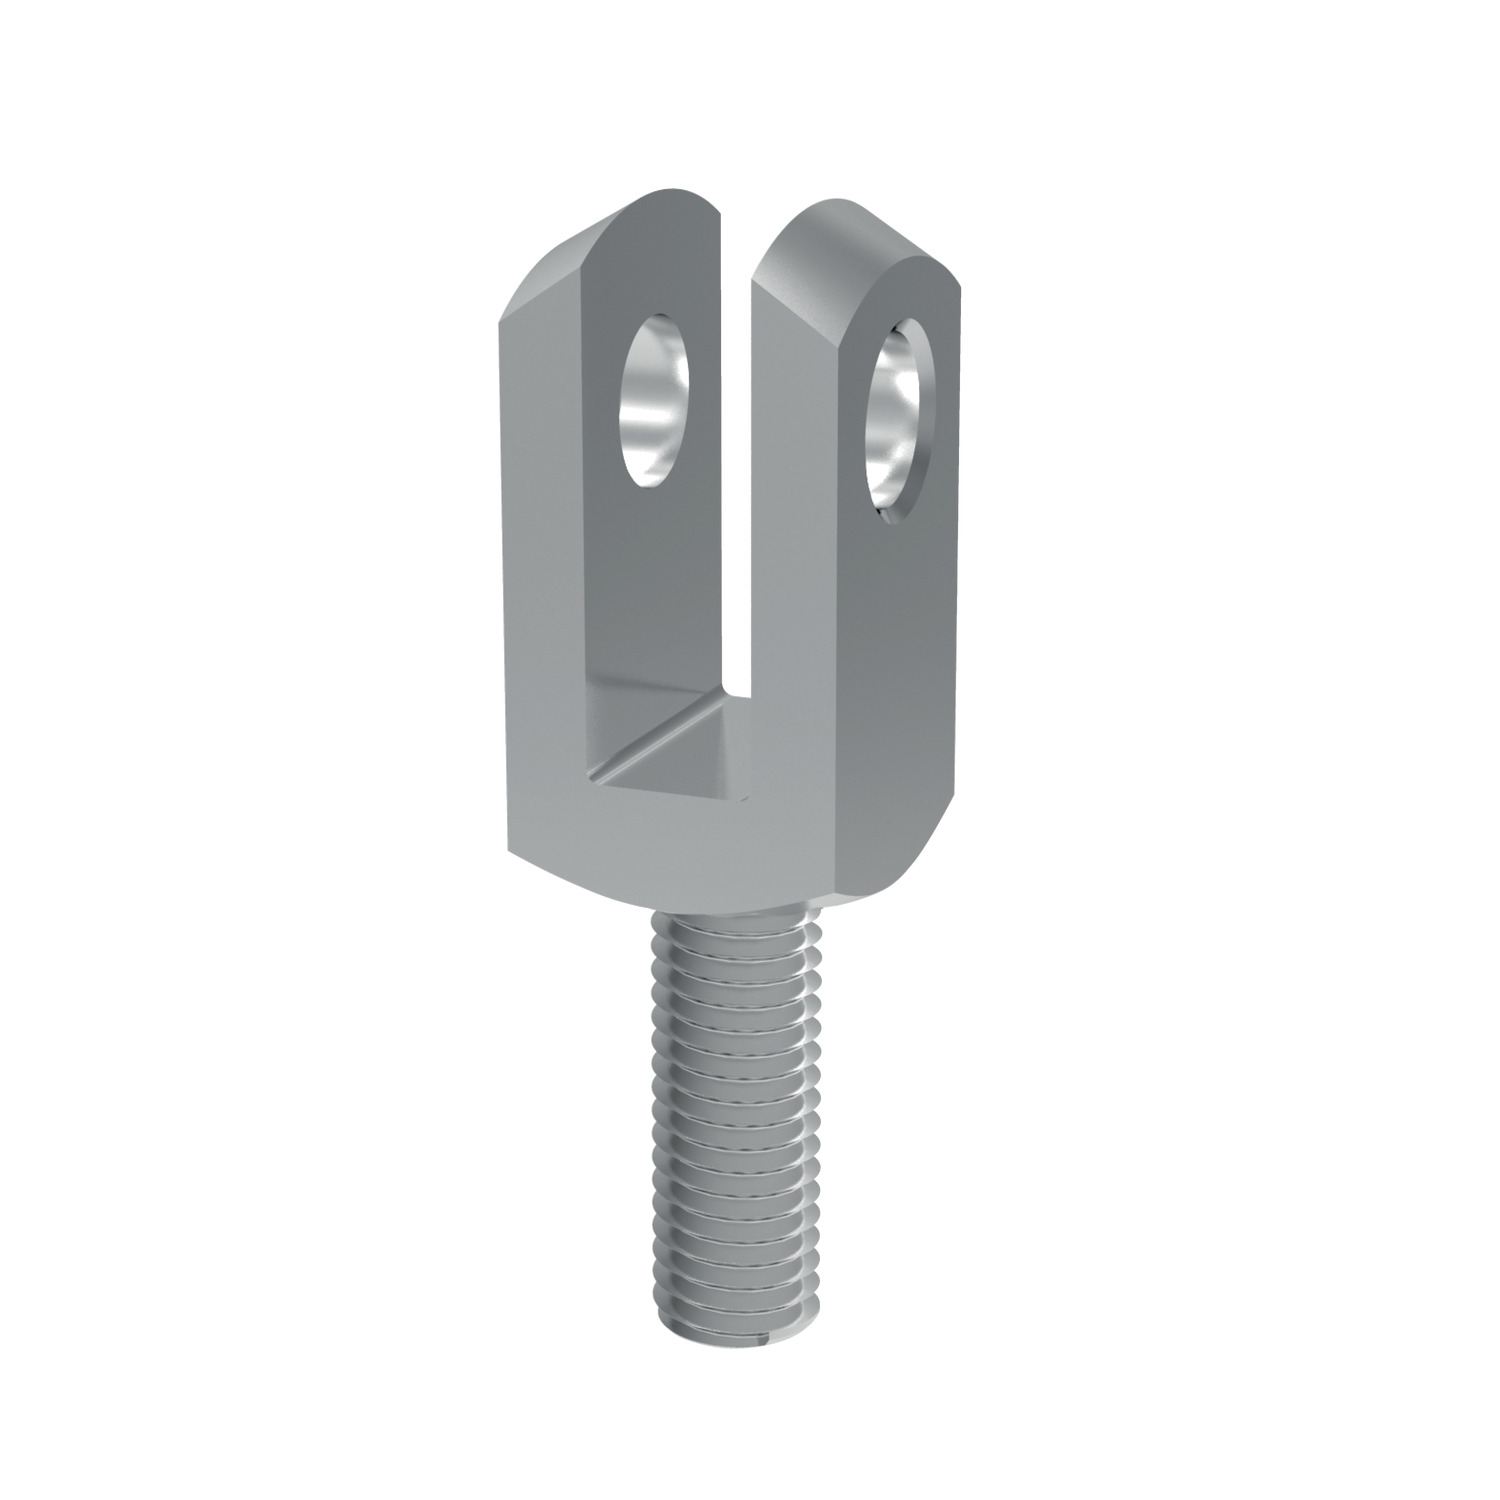 R3417 Stainless Male Clevis Joints